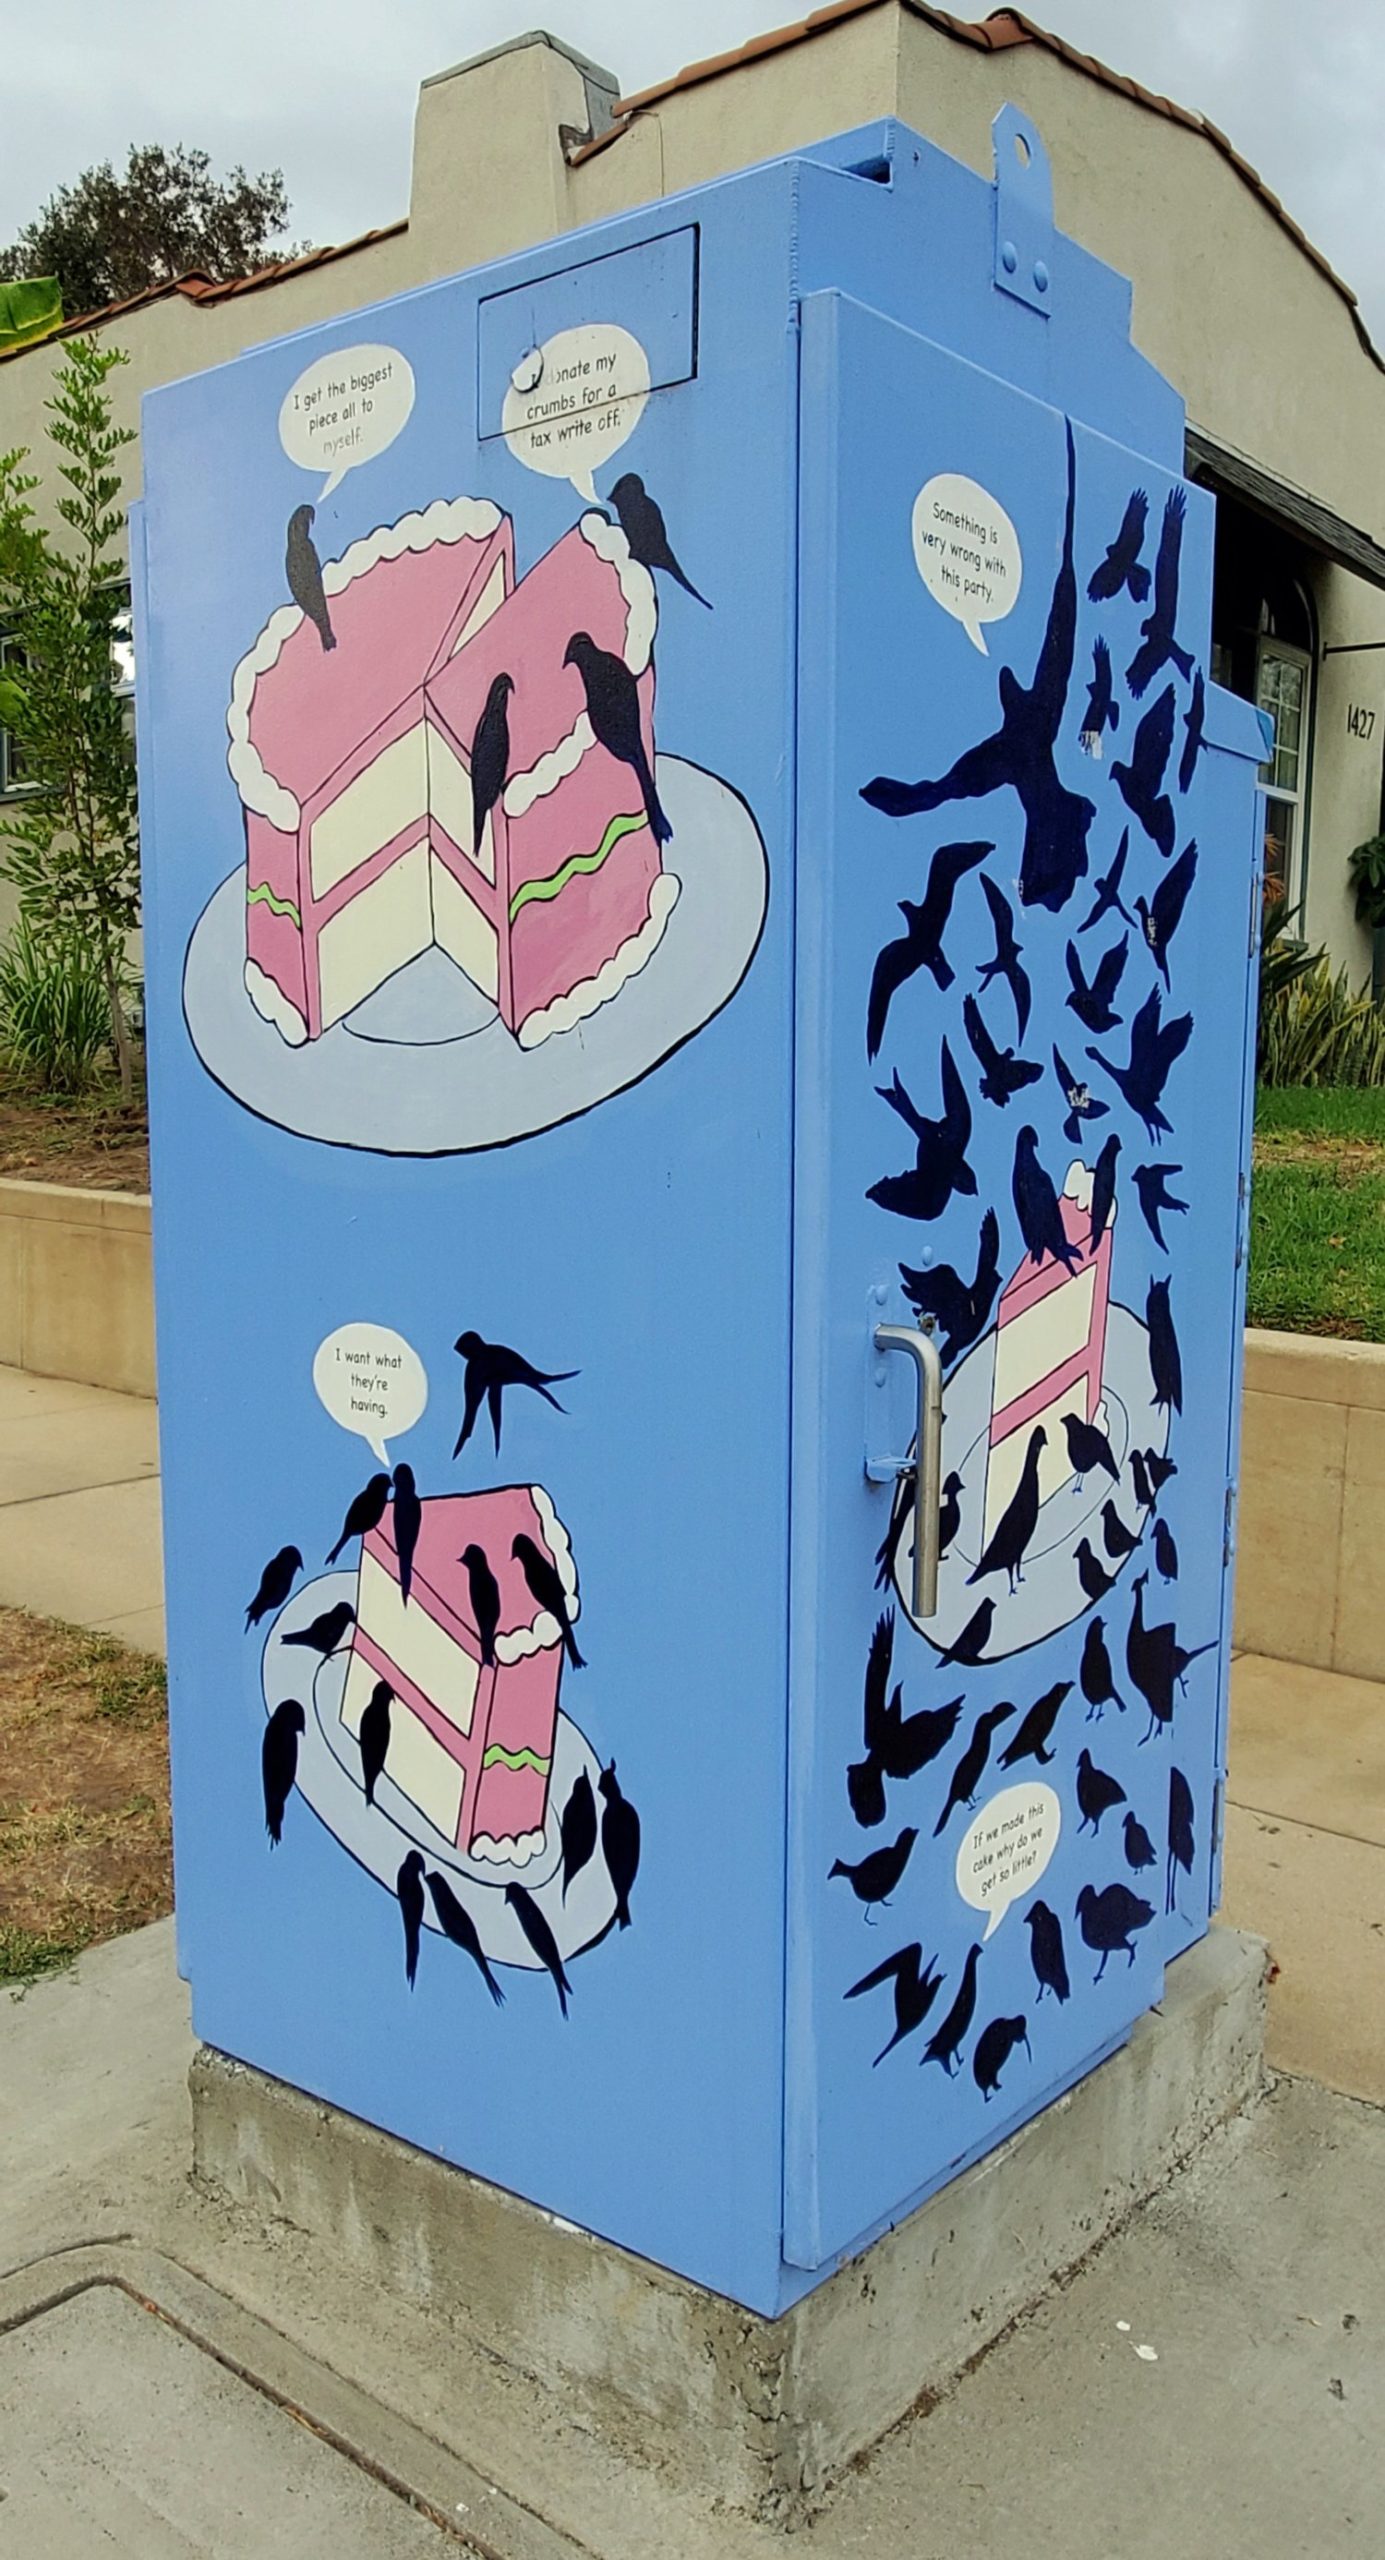 City of Las Vegas utility box art project expanding with 242 additions